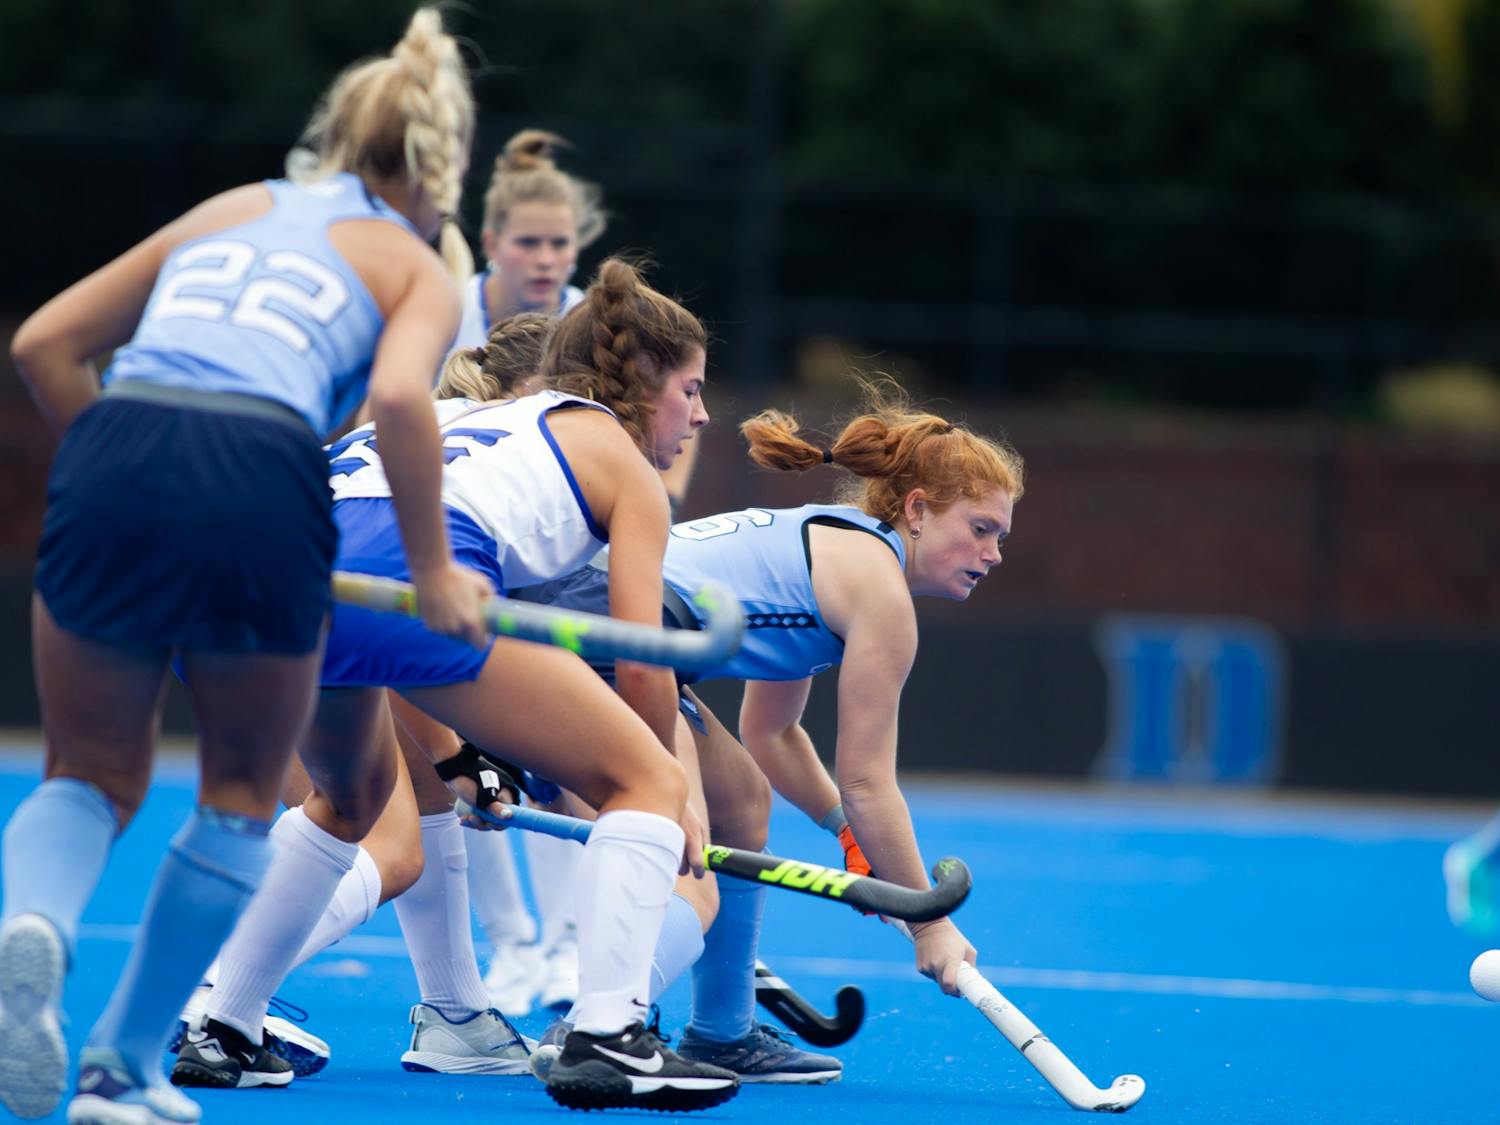 UNC sophomore back Kelly Smith (6) attempts to keep the ball in play during a field hockey game against Duke on Saturday, Oct. 29, 2022, at Jack Katz Stadium in Durham, N.C.